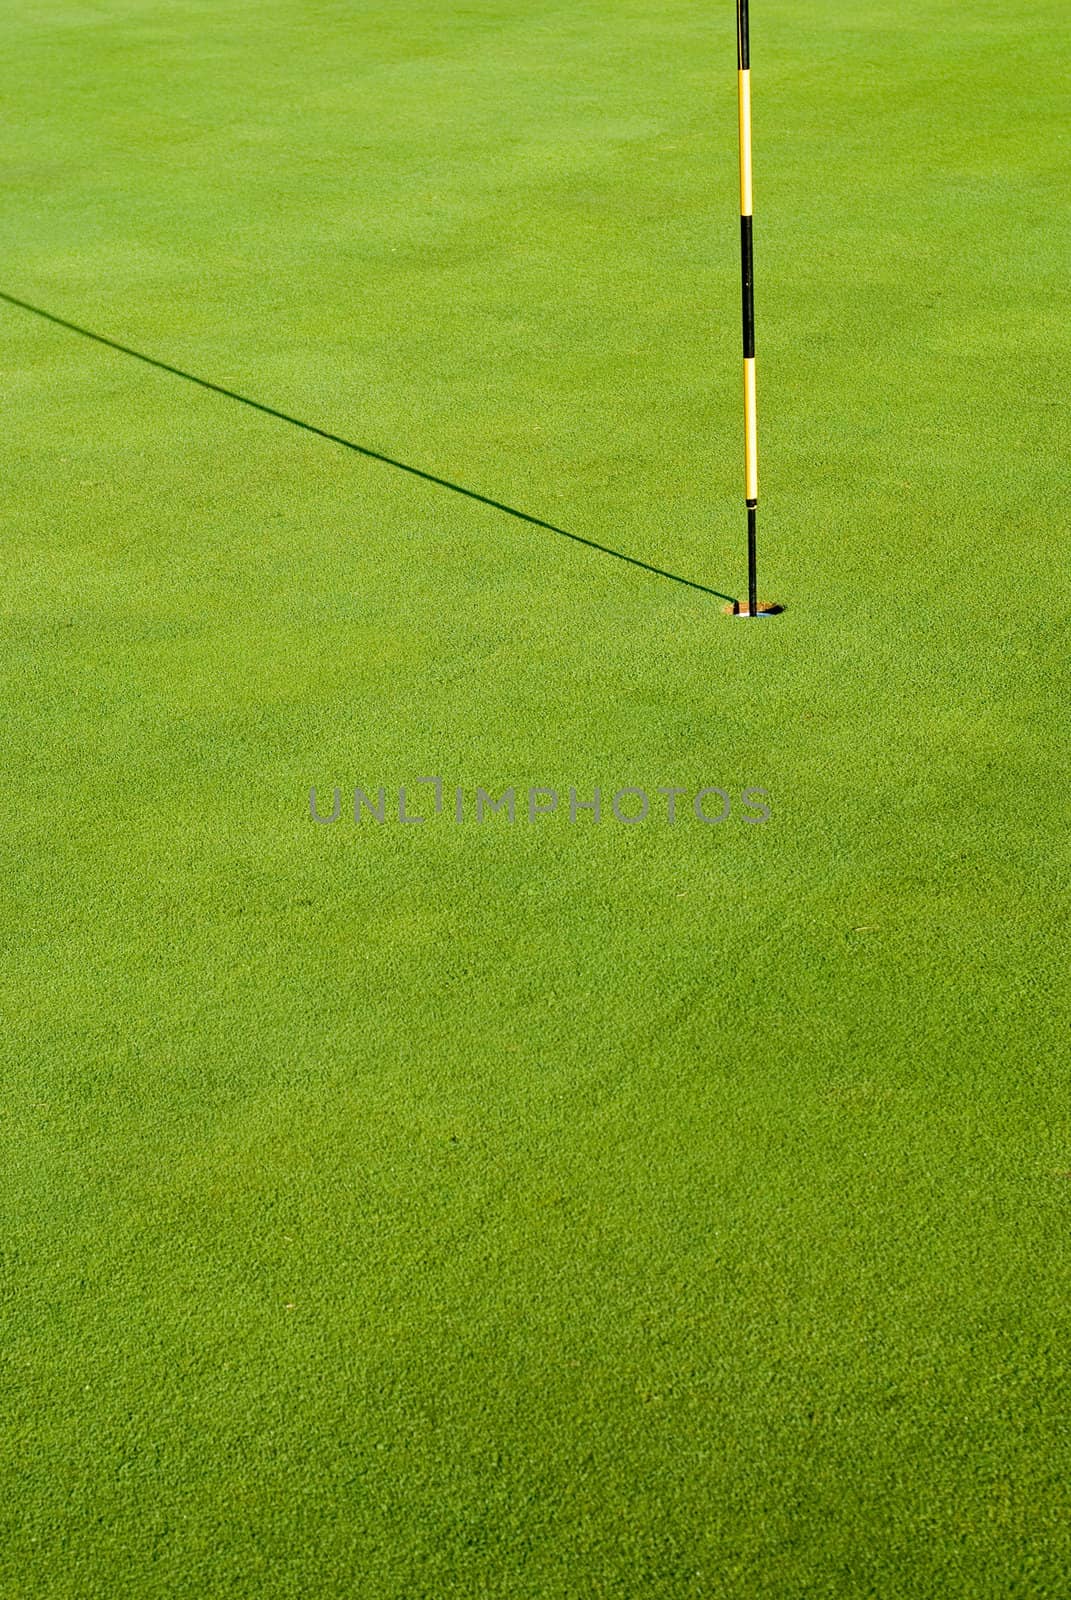 Striped golf flag in green hole with morning shadow on grass